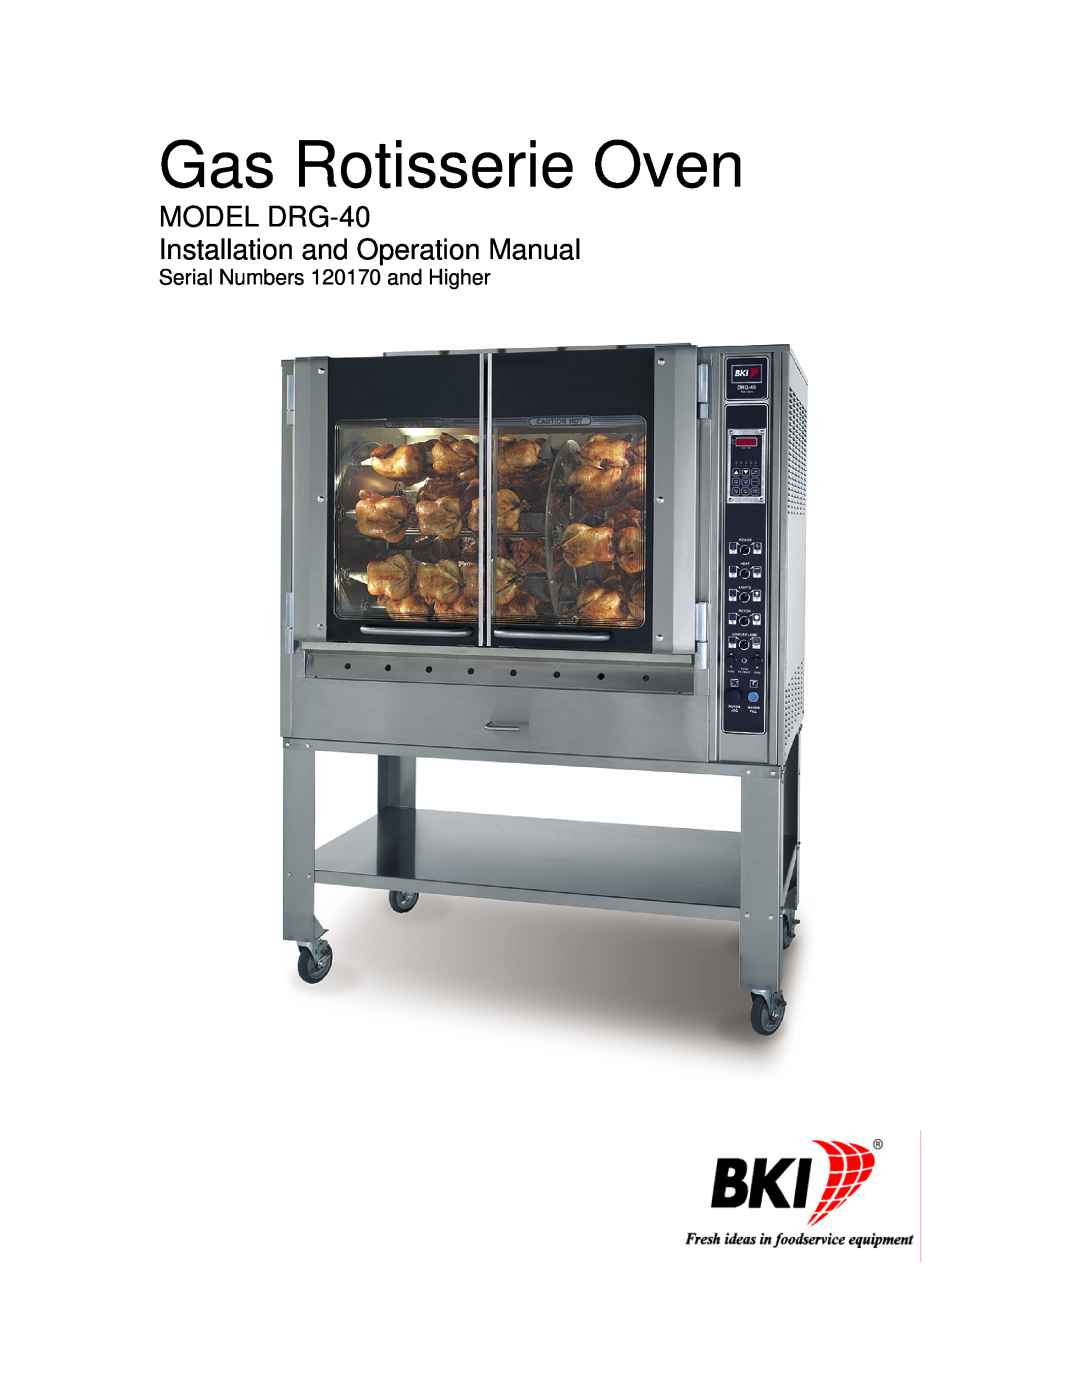 Bakers Pride Oven DRG-40 operation manual Gas Rotisserie Oven, Serial Numbers 120170 and Higher 